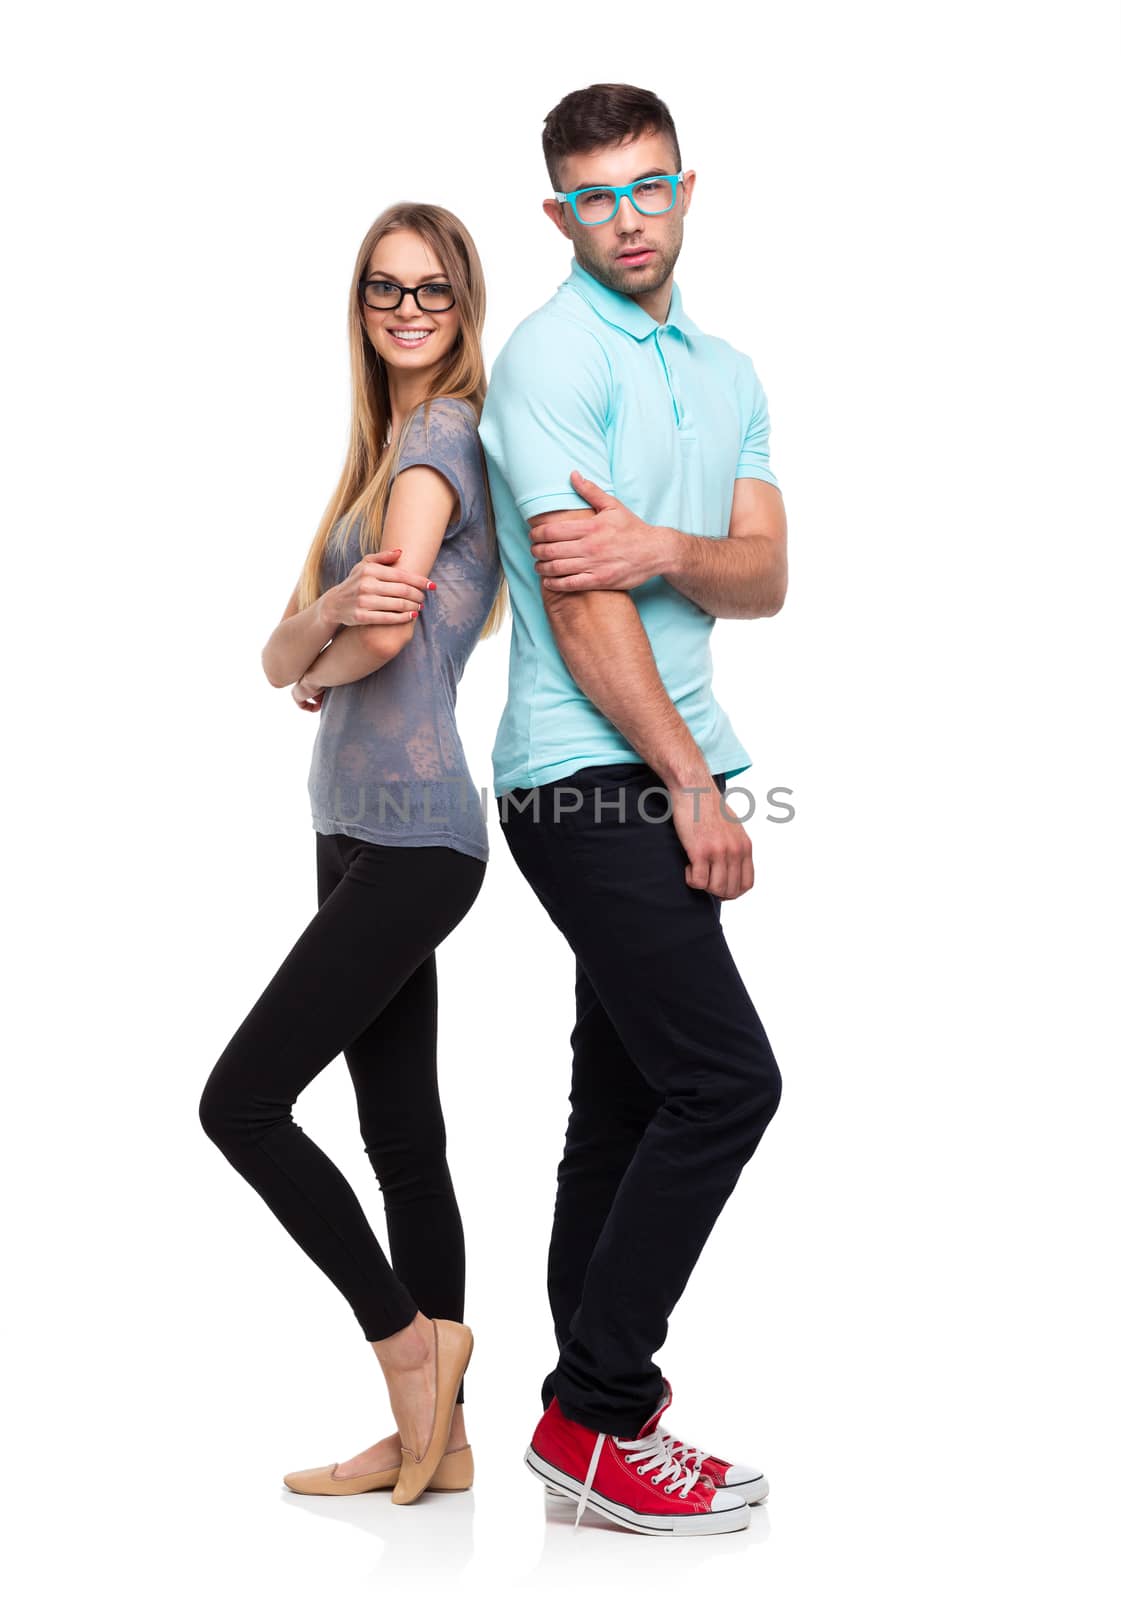 Beautiful young happy couple smiling, man and woman looking at camera, isolated over white background